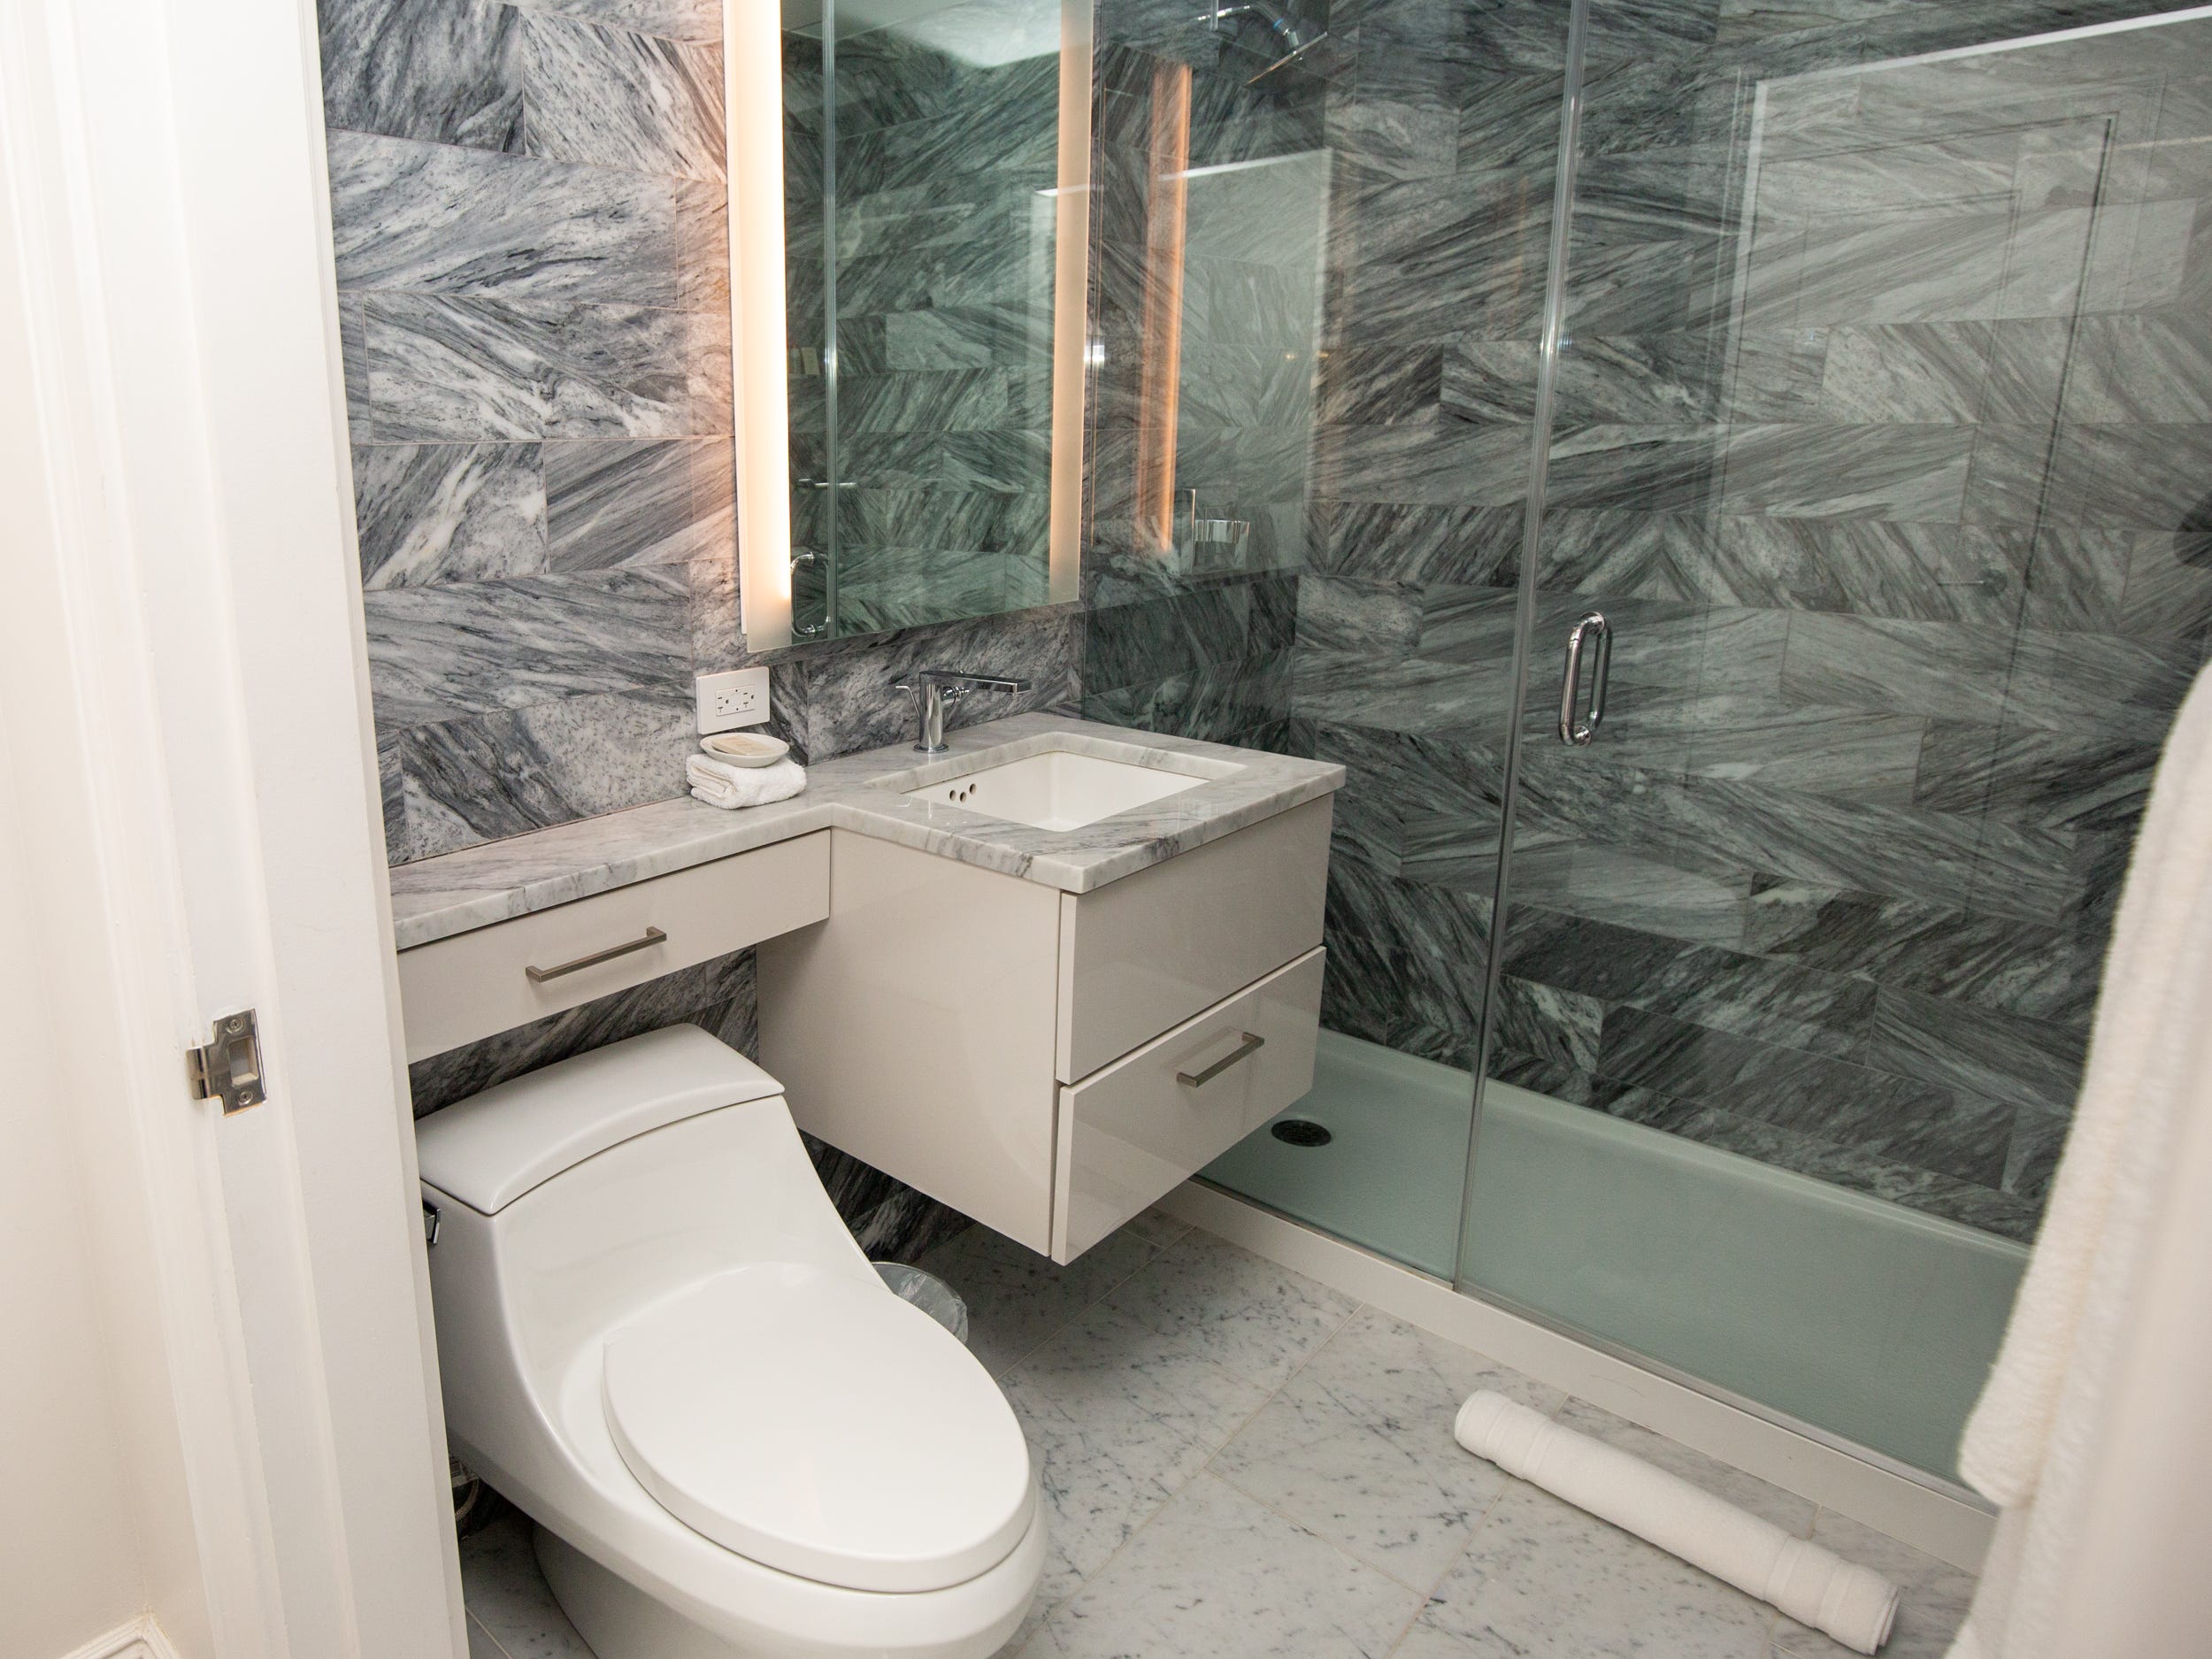 A marble bathroom with a sink, toilet, shower, vanity.